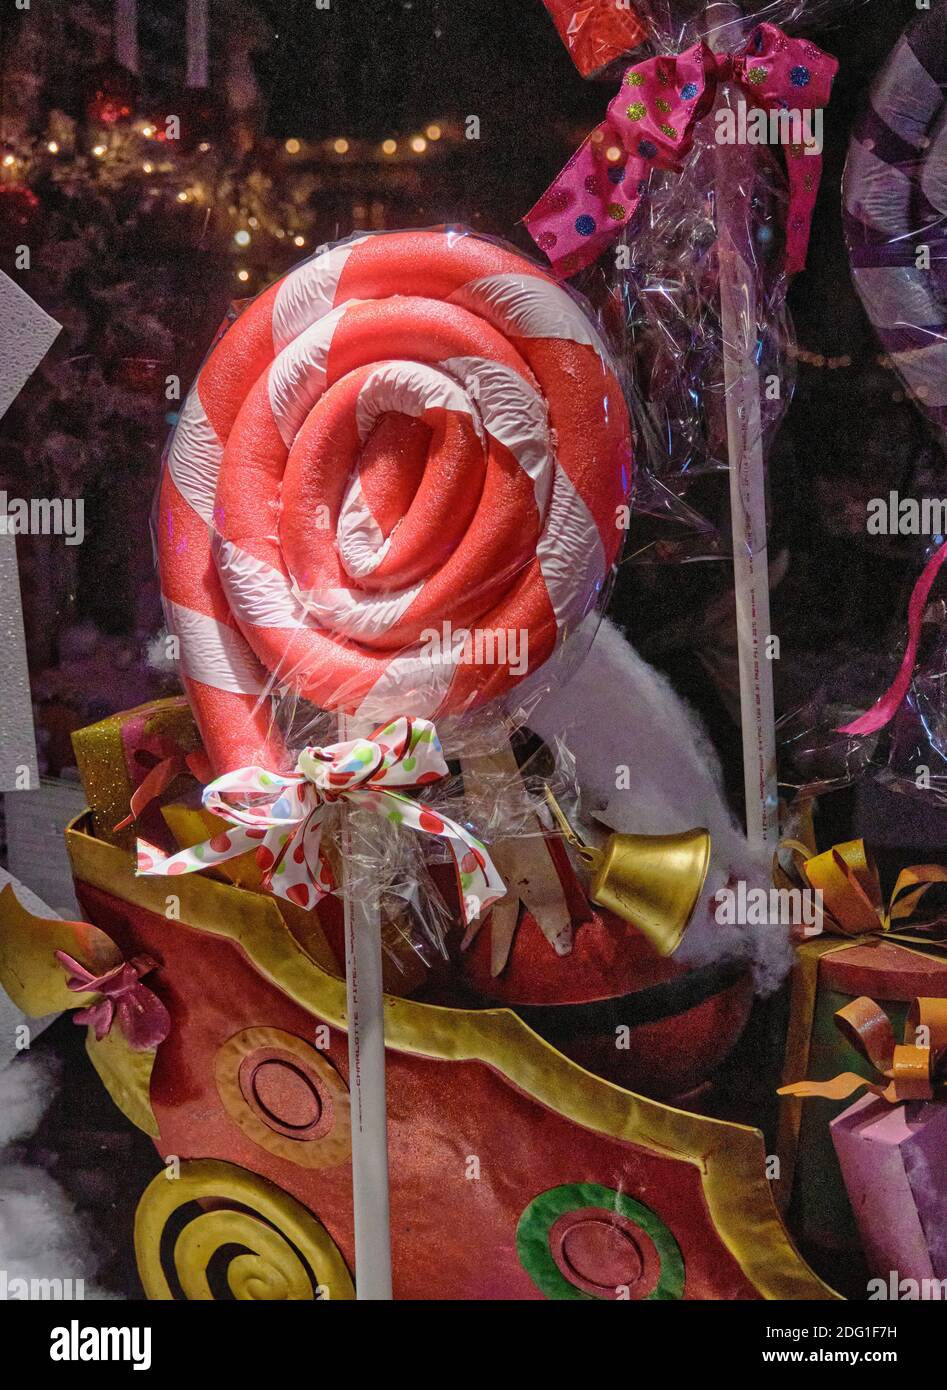 A large red and white lollipop and model sleigh decorate a Lewes, Delaware store window during the Christmas holiday season. Stock Photo